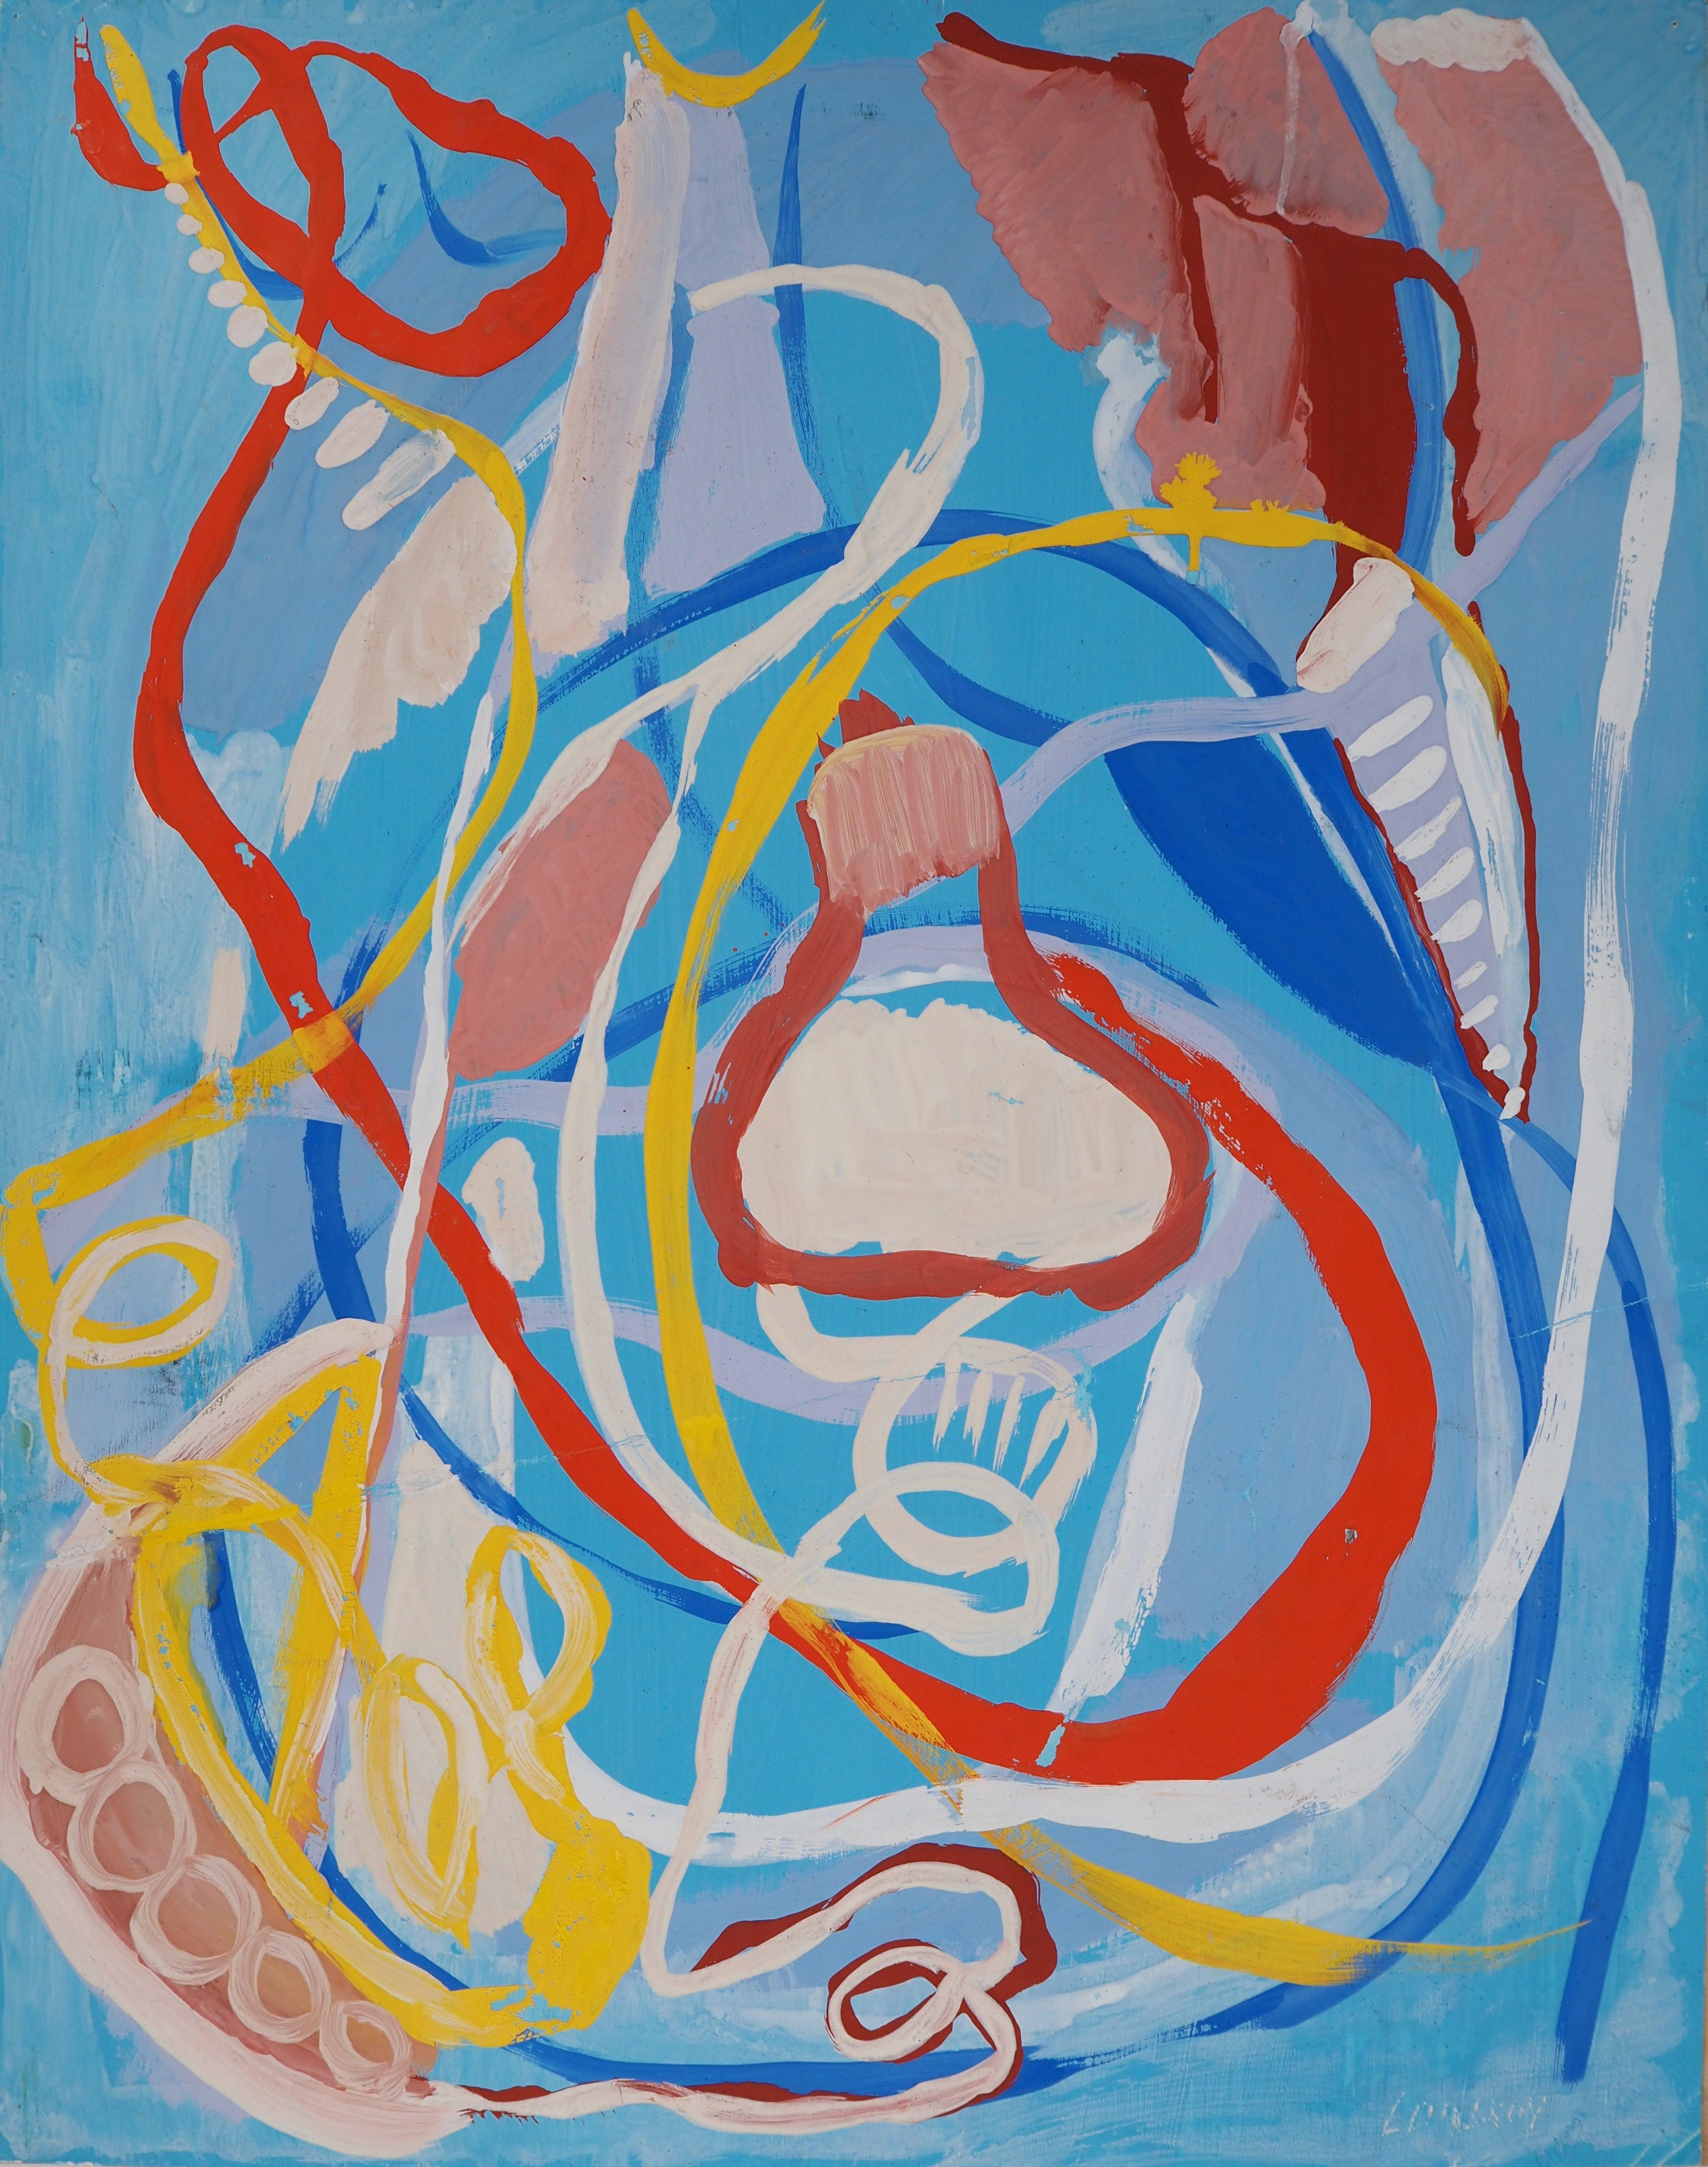 André Lanskoy (1903-1976)
Abstract composition on blue background

Original gouache
Signed lower right
On paper 61 x 48 cm

AUTHENTICITY : We thank the Lanskoy Committee who kindly confirmed the authenticity of this work. A certificate may be